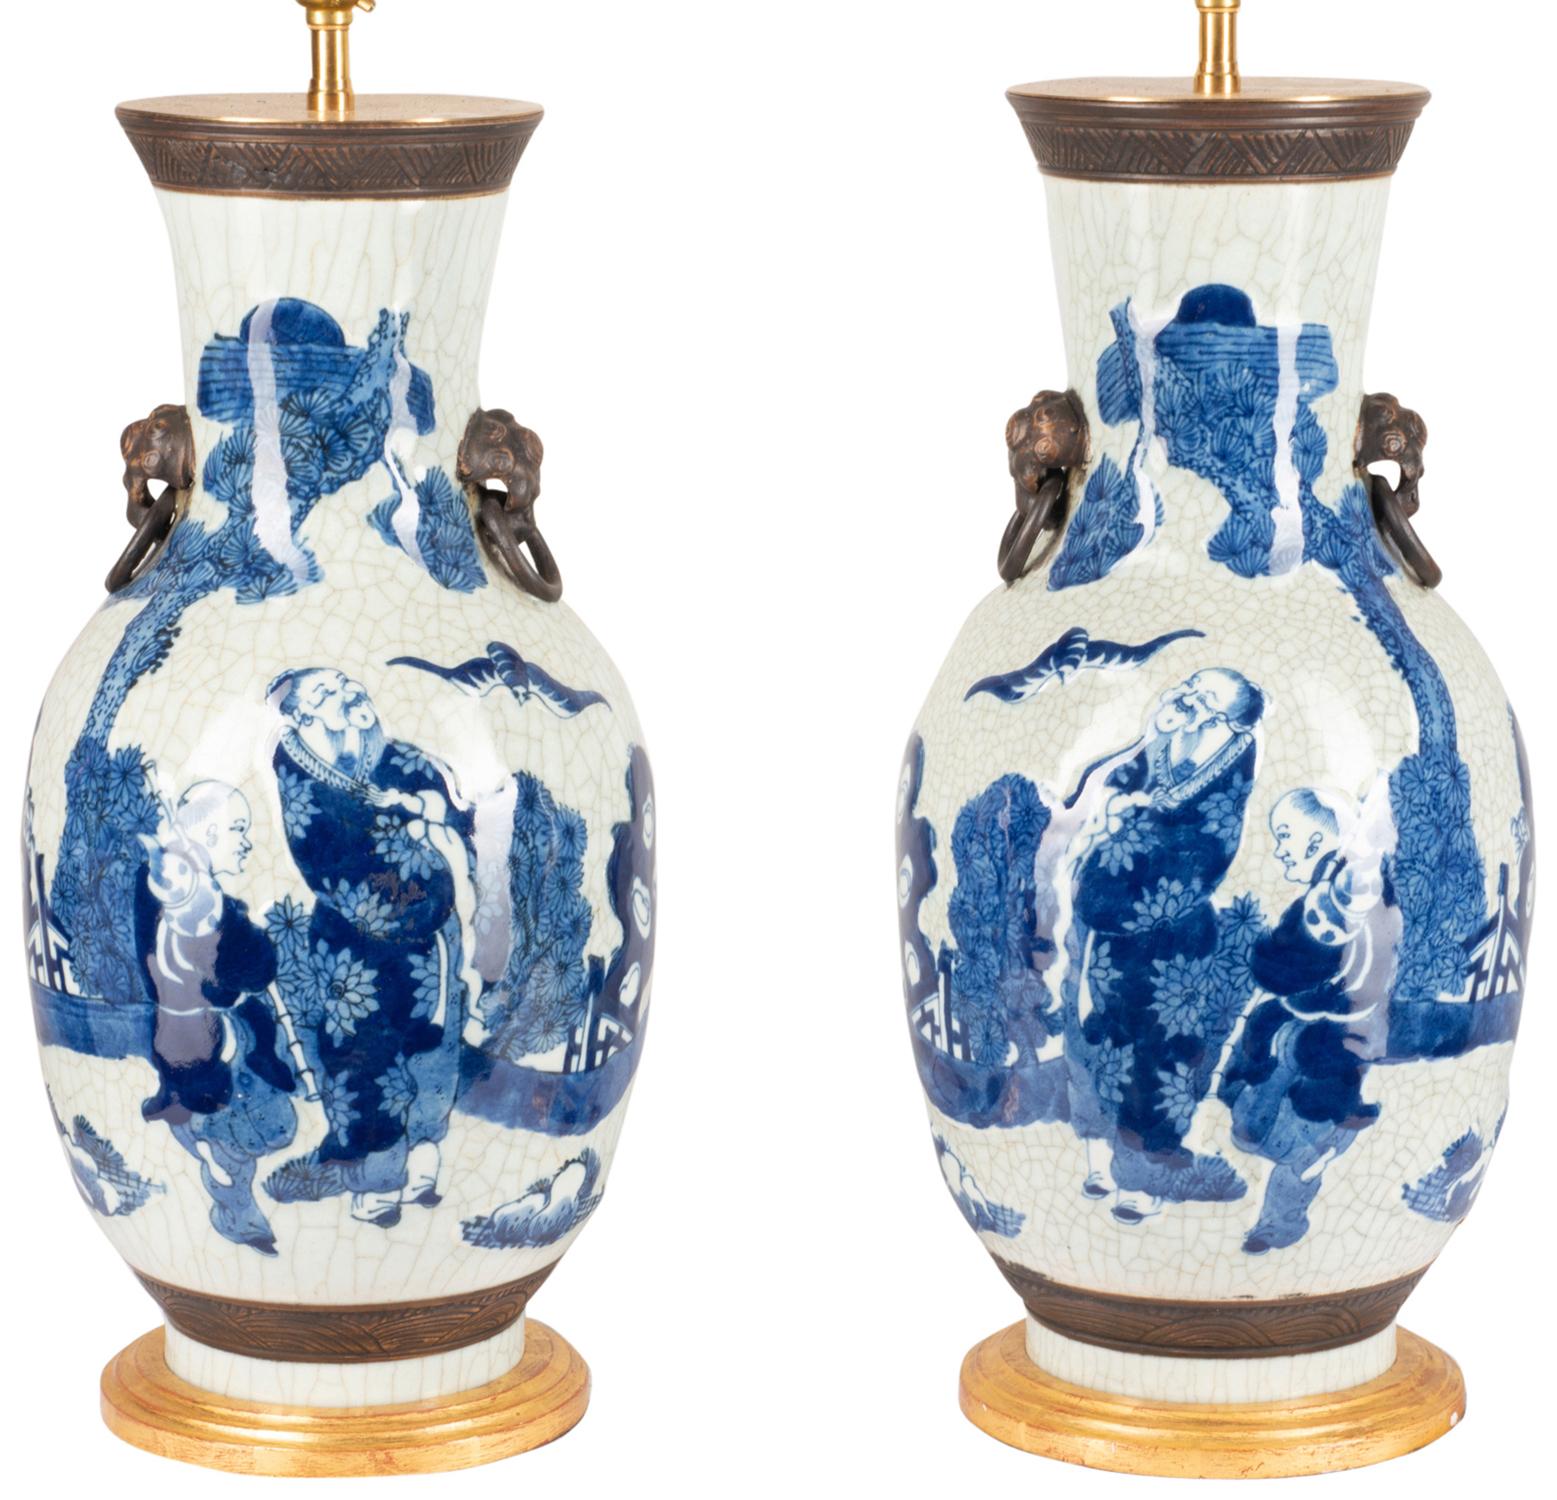 A good quality pair of Chinese blue and white crackle ware vases / lamps, each with oriental figures looking up at bats flying around the sky.
Mounted on carved gilded bases.